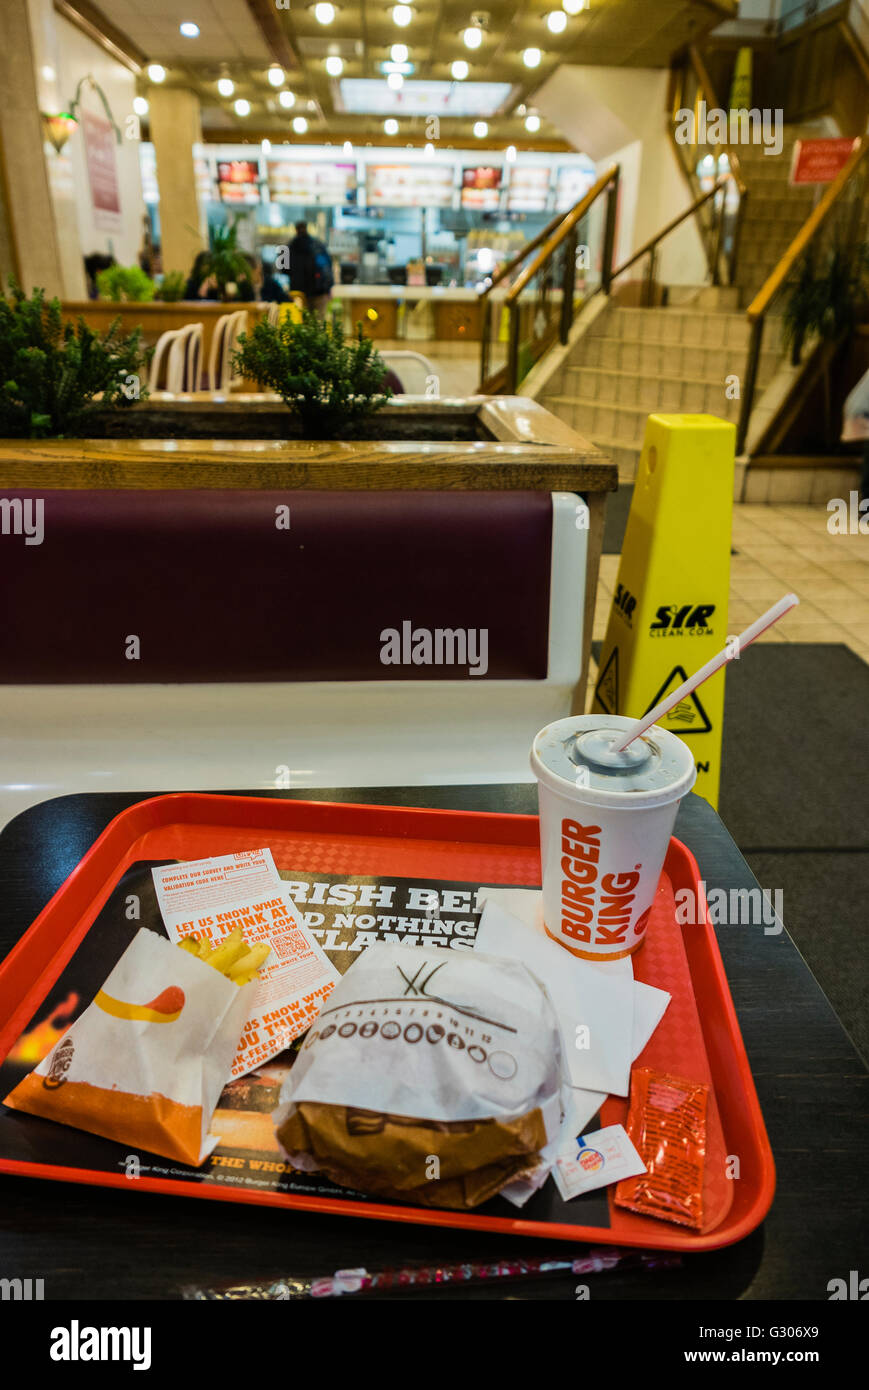 Hamburger, fries and drink on a tray in a Burger King fast-food restaurant Stock Photo